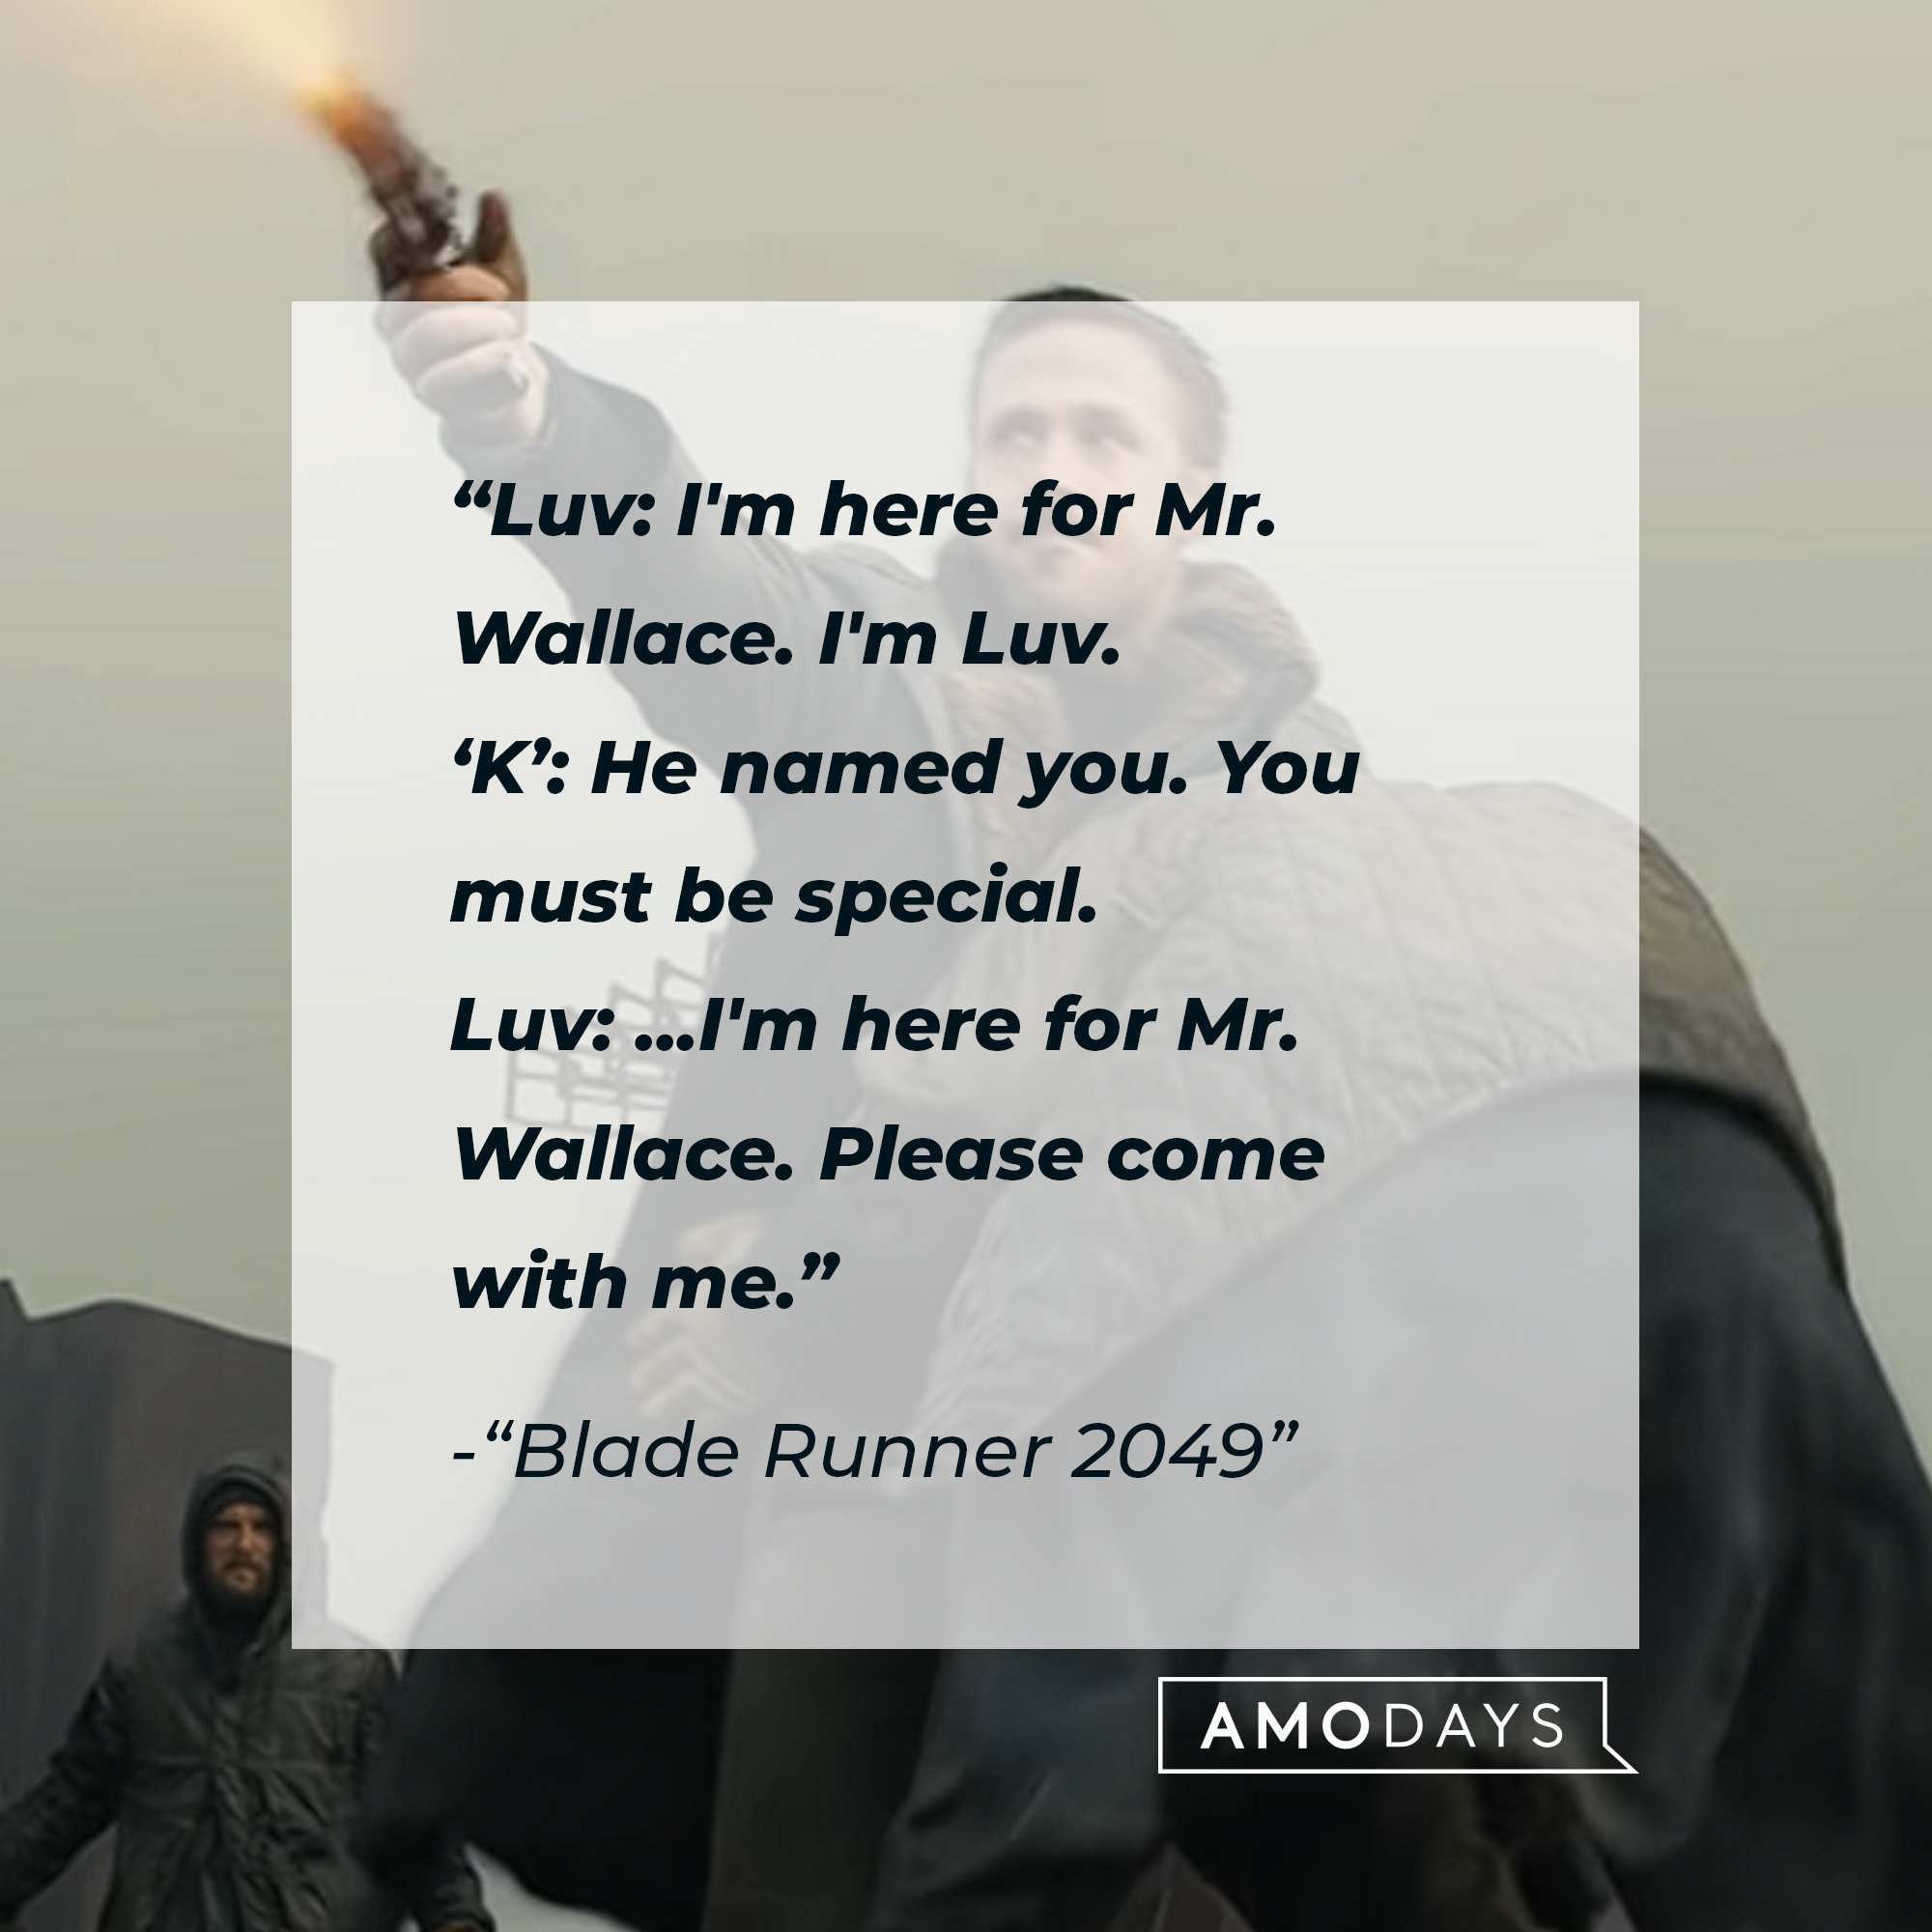 An image of Officer K with the quote: "Luv: I'm here for Mr. Wallace. I'm Luv.; 'K': He named you. You must be special. ; Luv: ...I'm here for Mr. Wallace. Please come with me." | Source: Youtube.com/WarnerBrosPictures